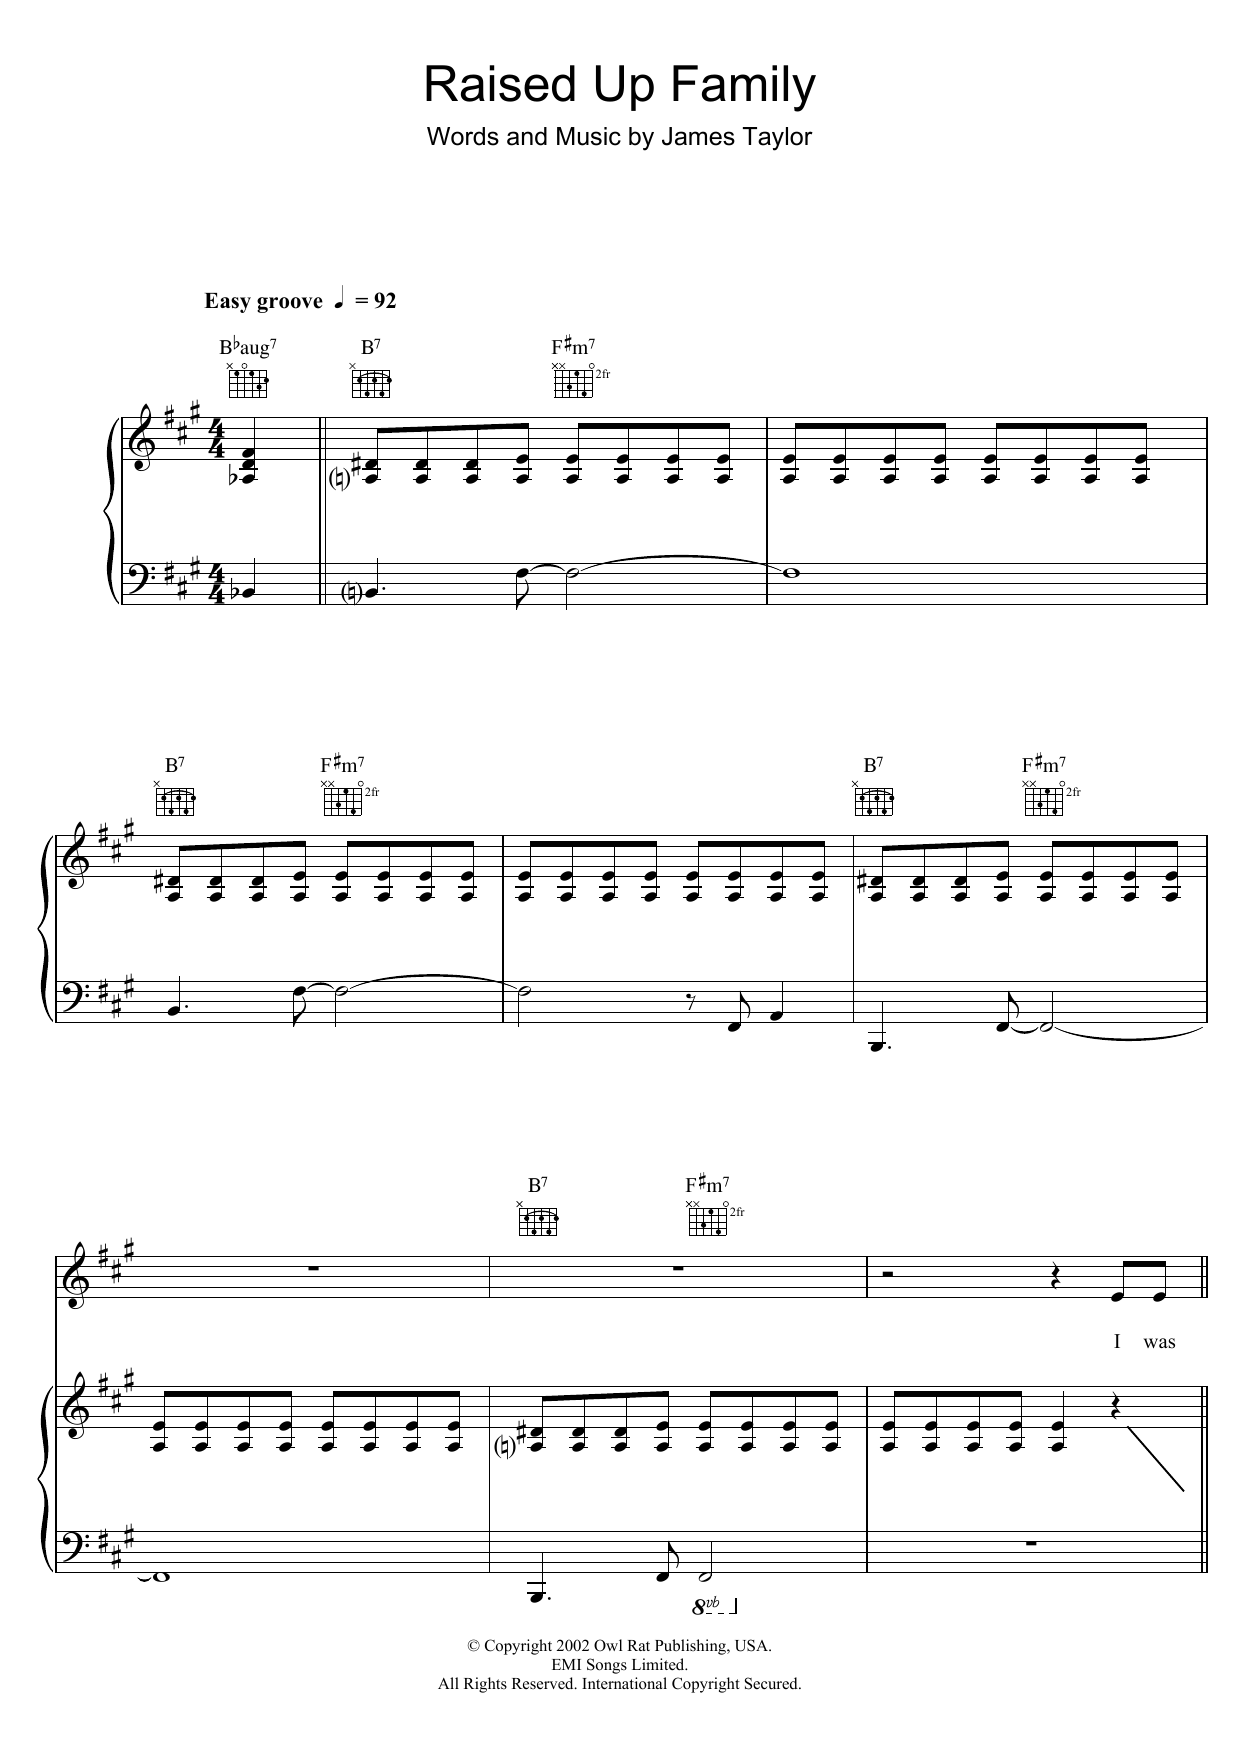 Download James Taylor Raised Up Family Sheet Music